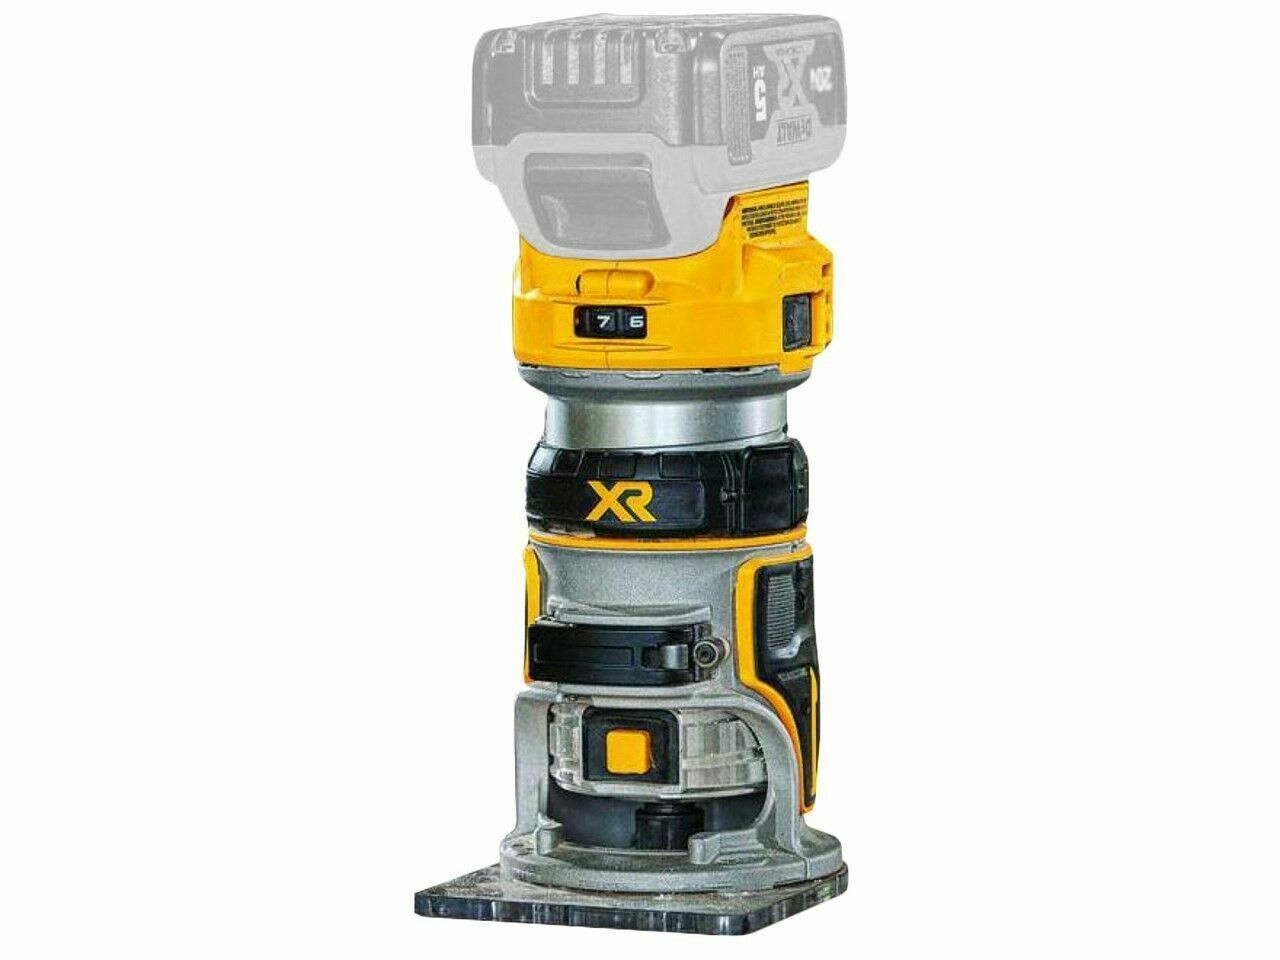 DeWalt DCW604NT 18V XR Brushless ¼" Router With Fixed & Plunge Bases